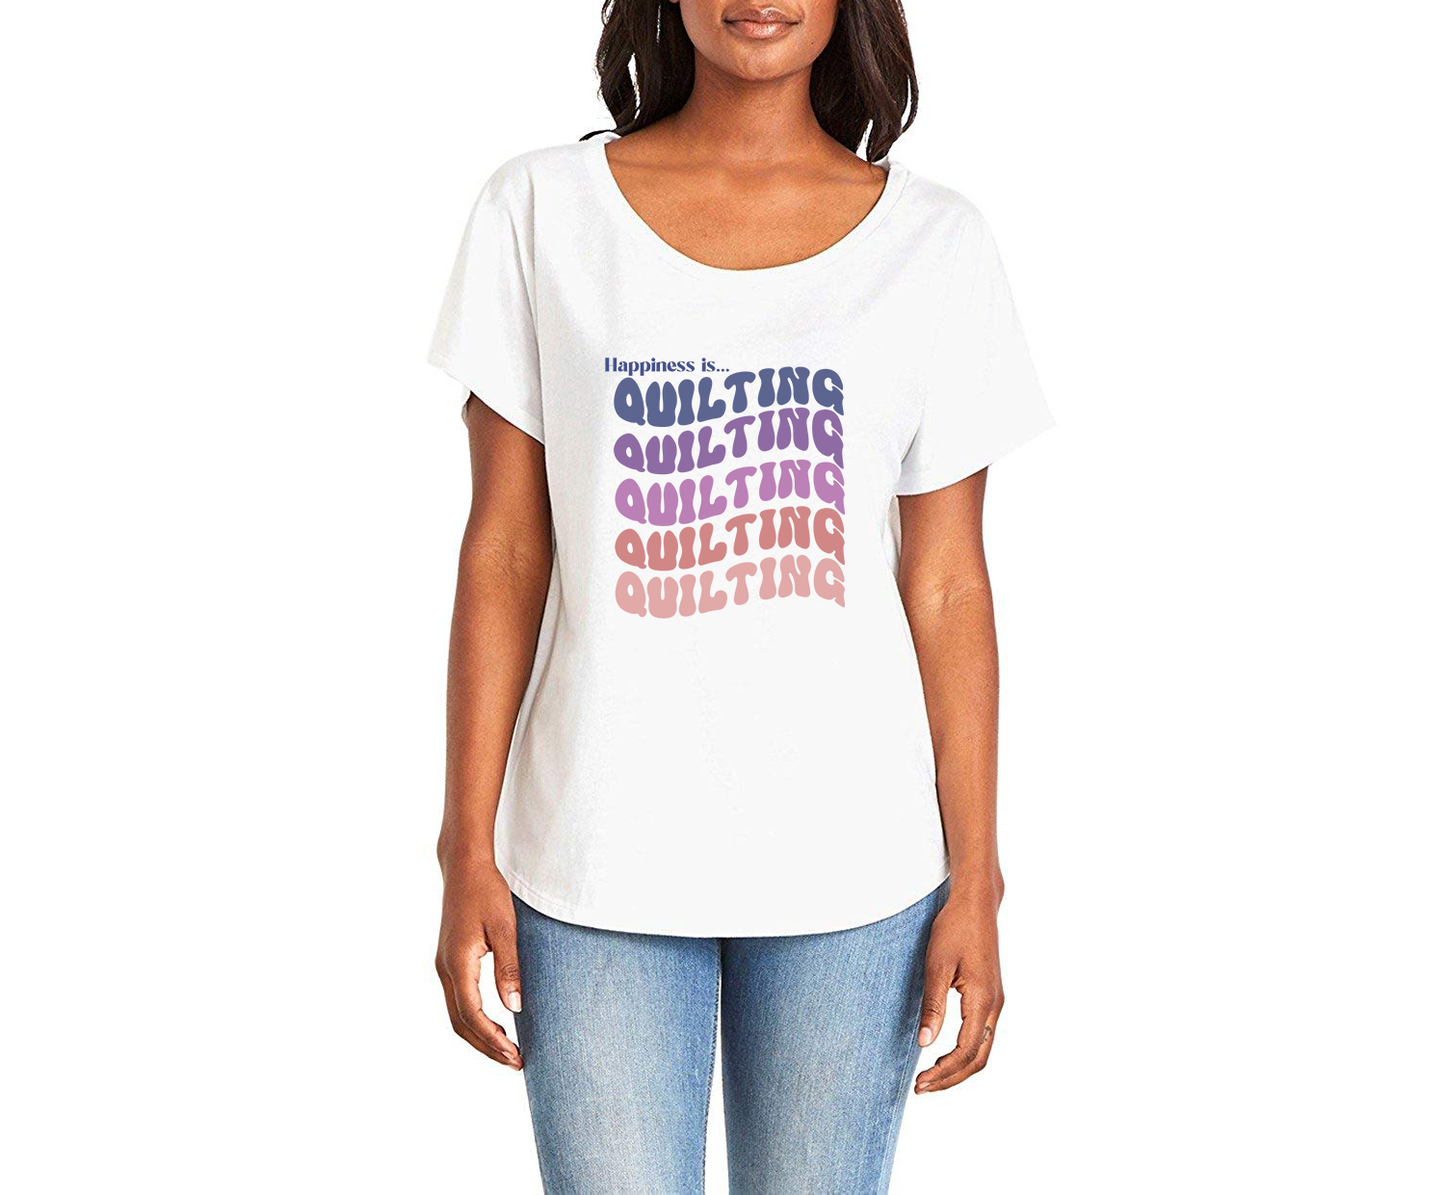 Happiness is Quilting Ladies Tee Shirt - In White & Grey